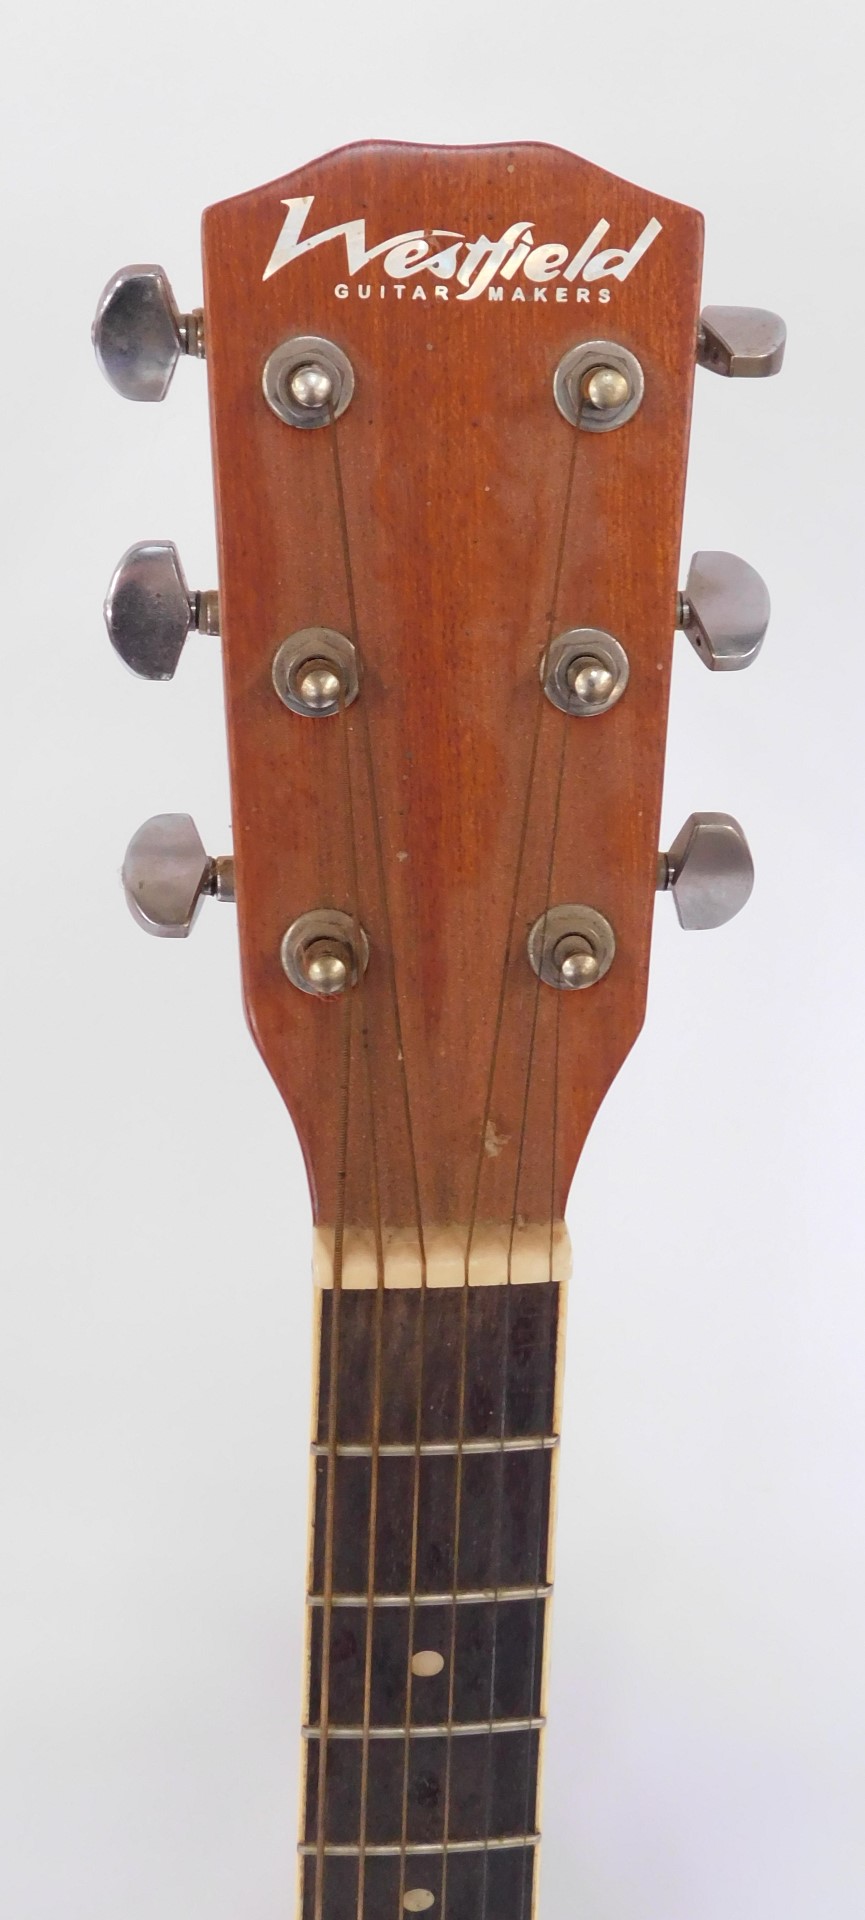 A Westfield guitar, model B200-SB, on guitar stand, with silver marker signatures relating to The Sm - Image 2 of 3